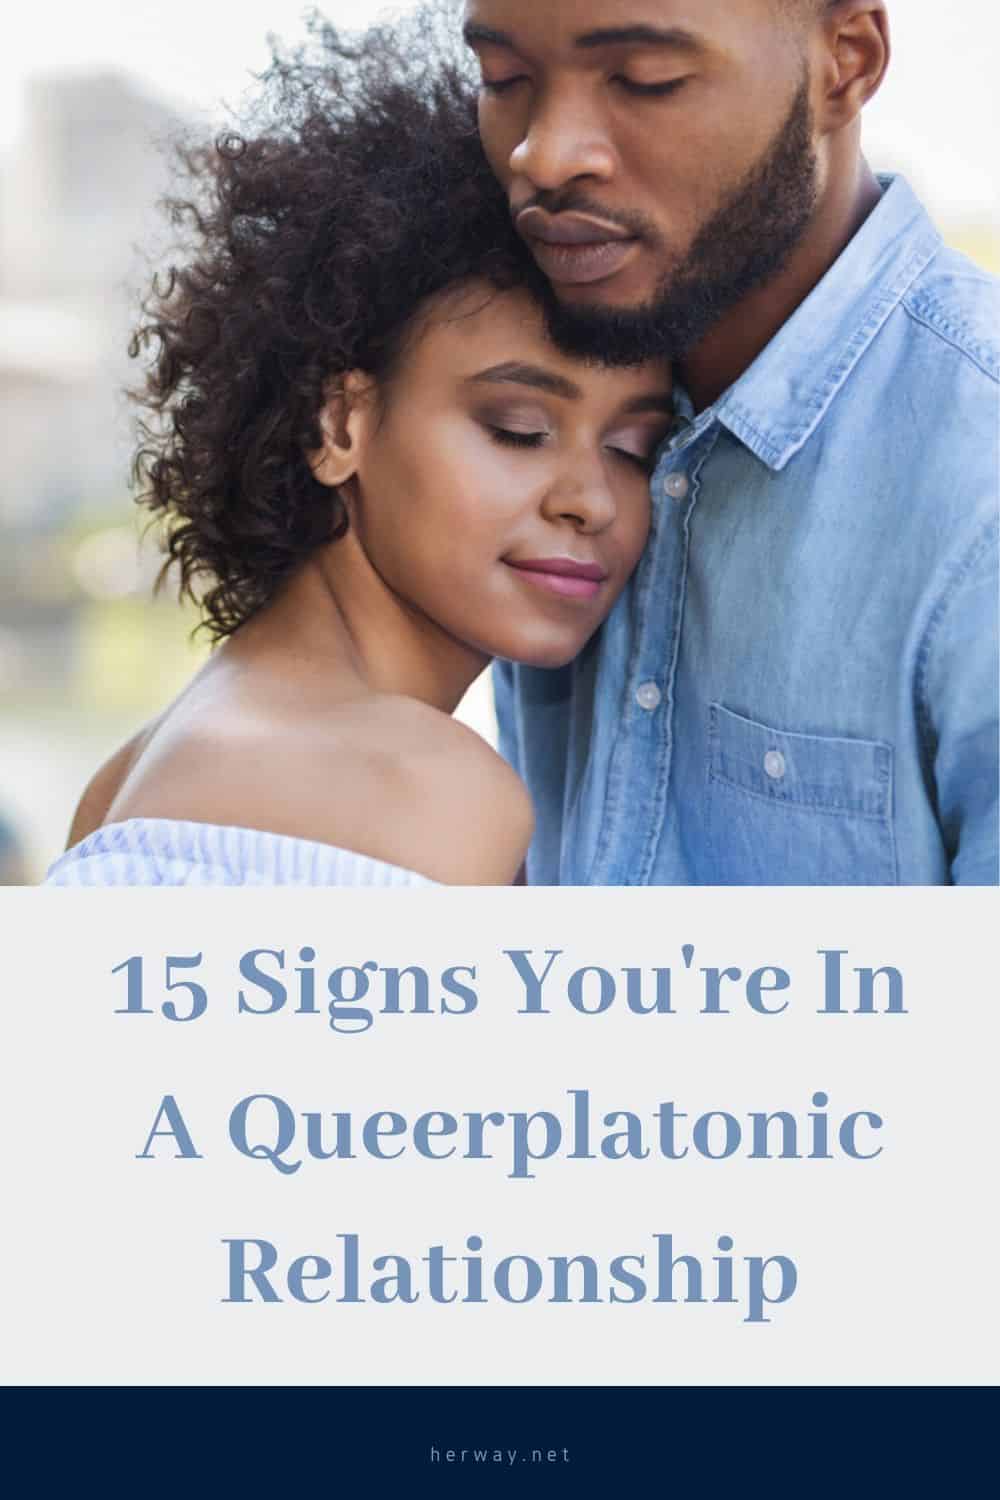 15 Signs You're In A Queerplatonic Relationship